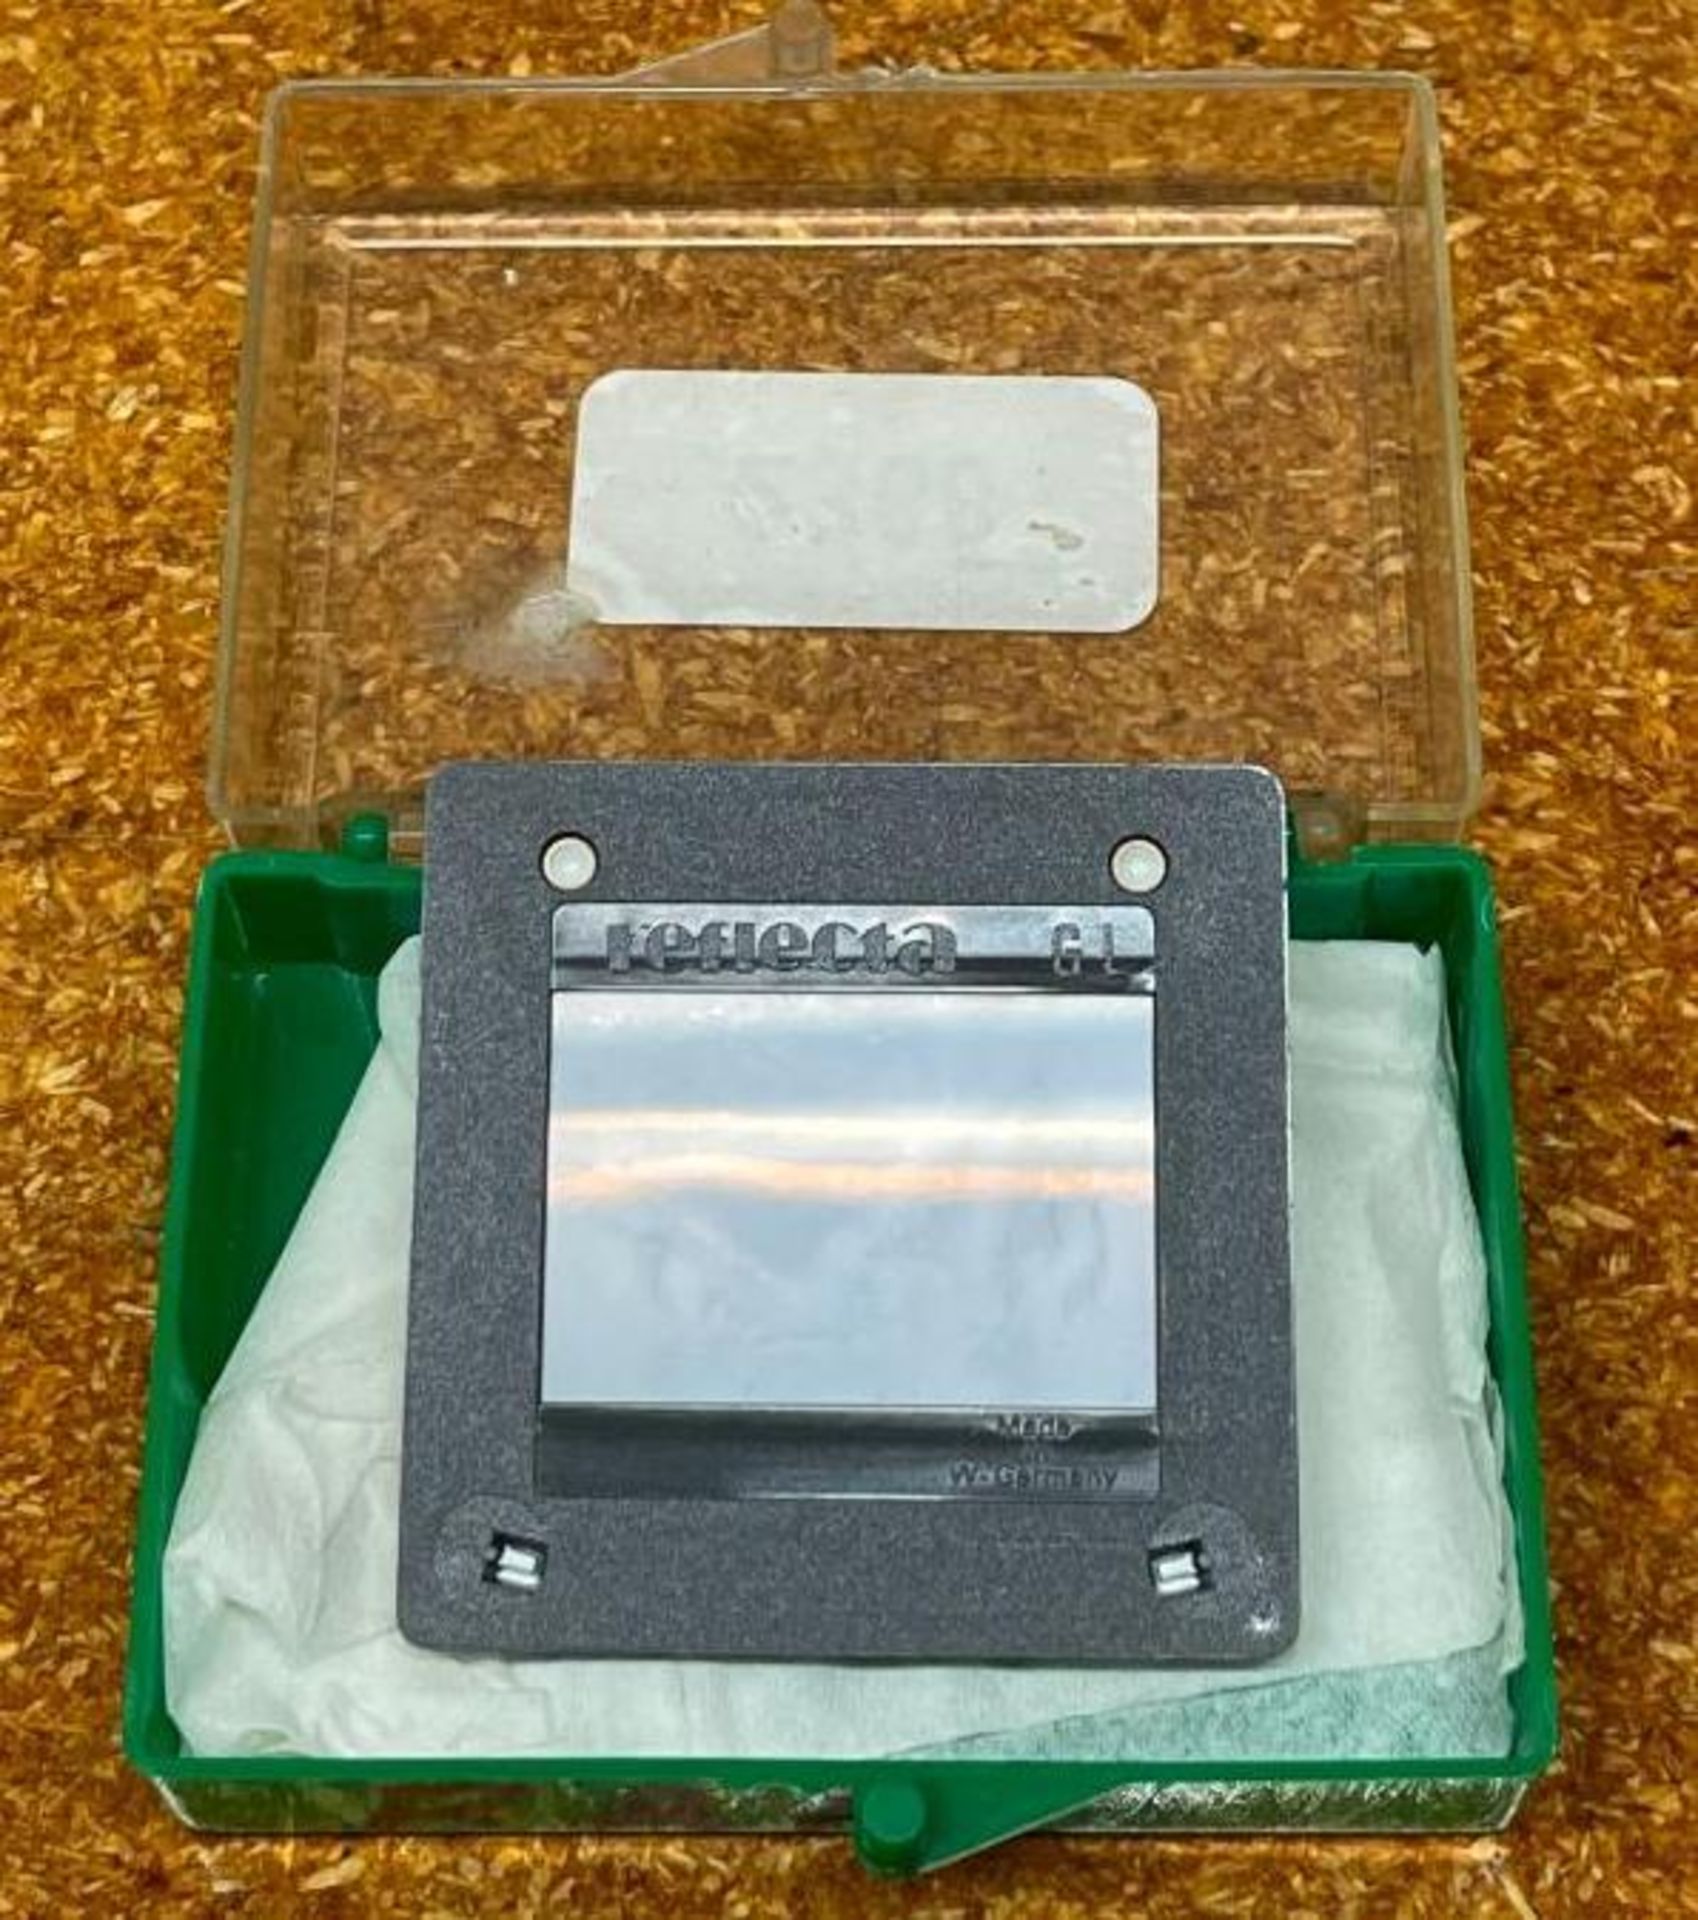 (2) HOLOGRAPHIC DIFFRACTION GRATING BRAND/MODEL: ARBOR SCIENTIFIC 33-0980 INFORMATION: MOUNTED IN 50